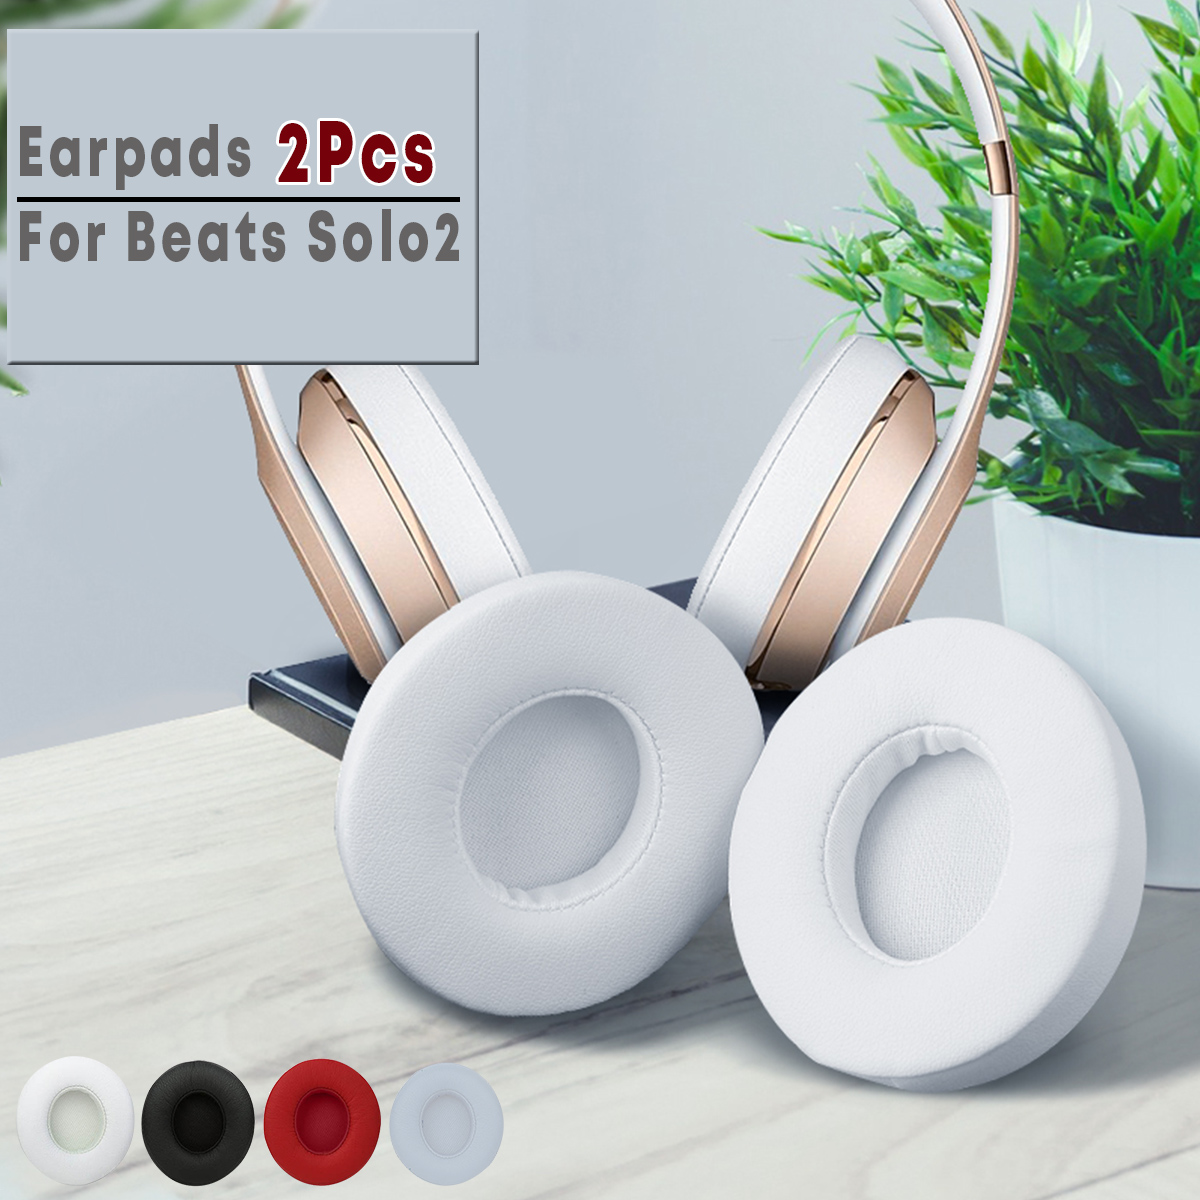 2Pcs-Replacement-Ear-Pads-Soft-Cushion-Cover-Earmuff-for-Beats-Solo-2-Headphone-1555379-1